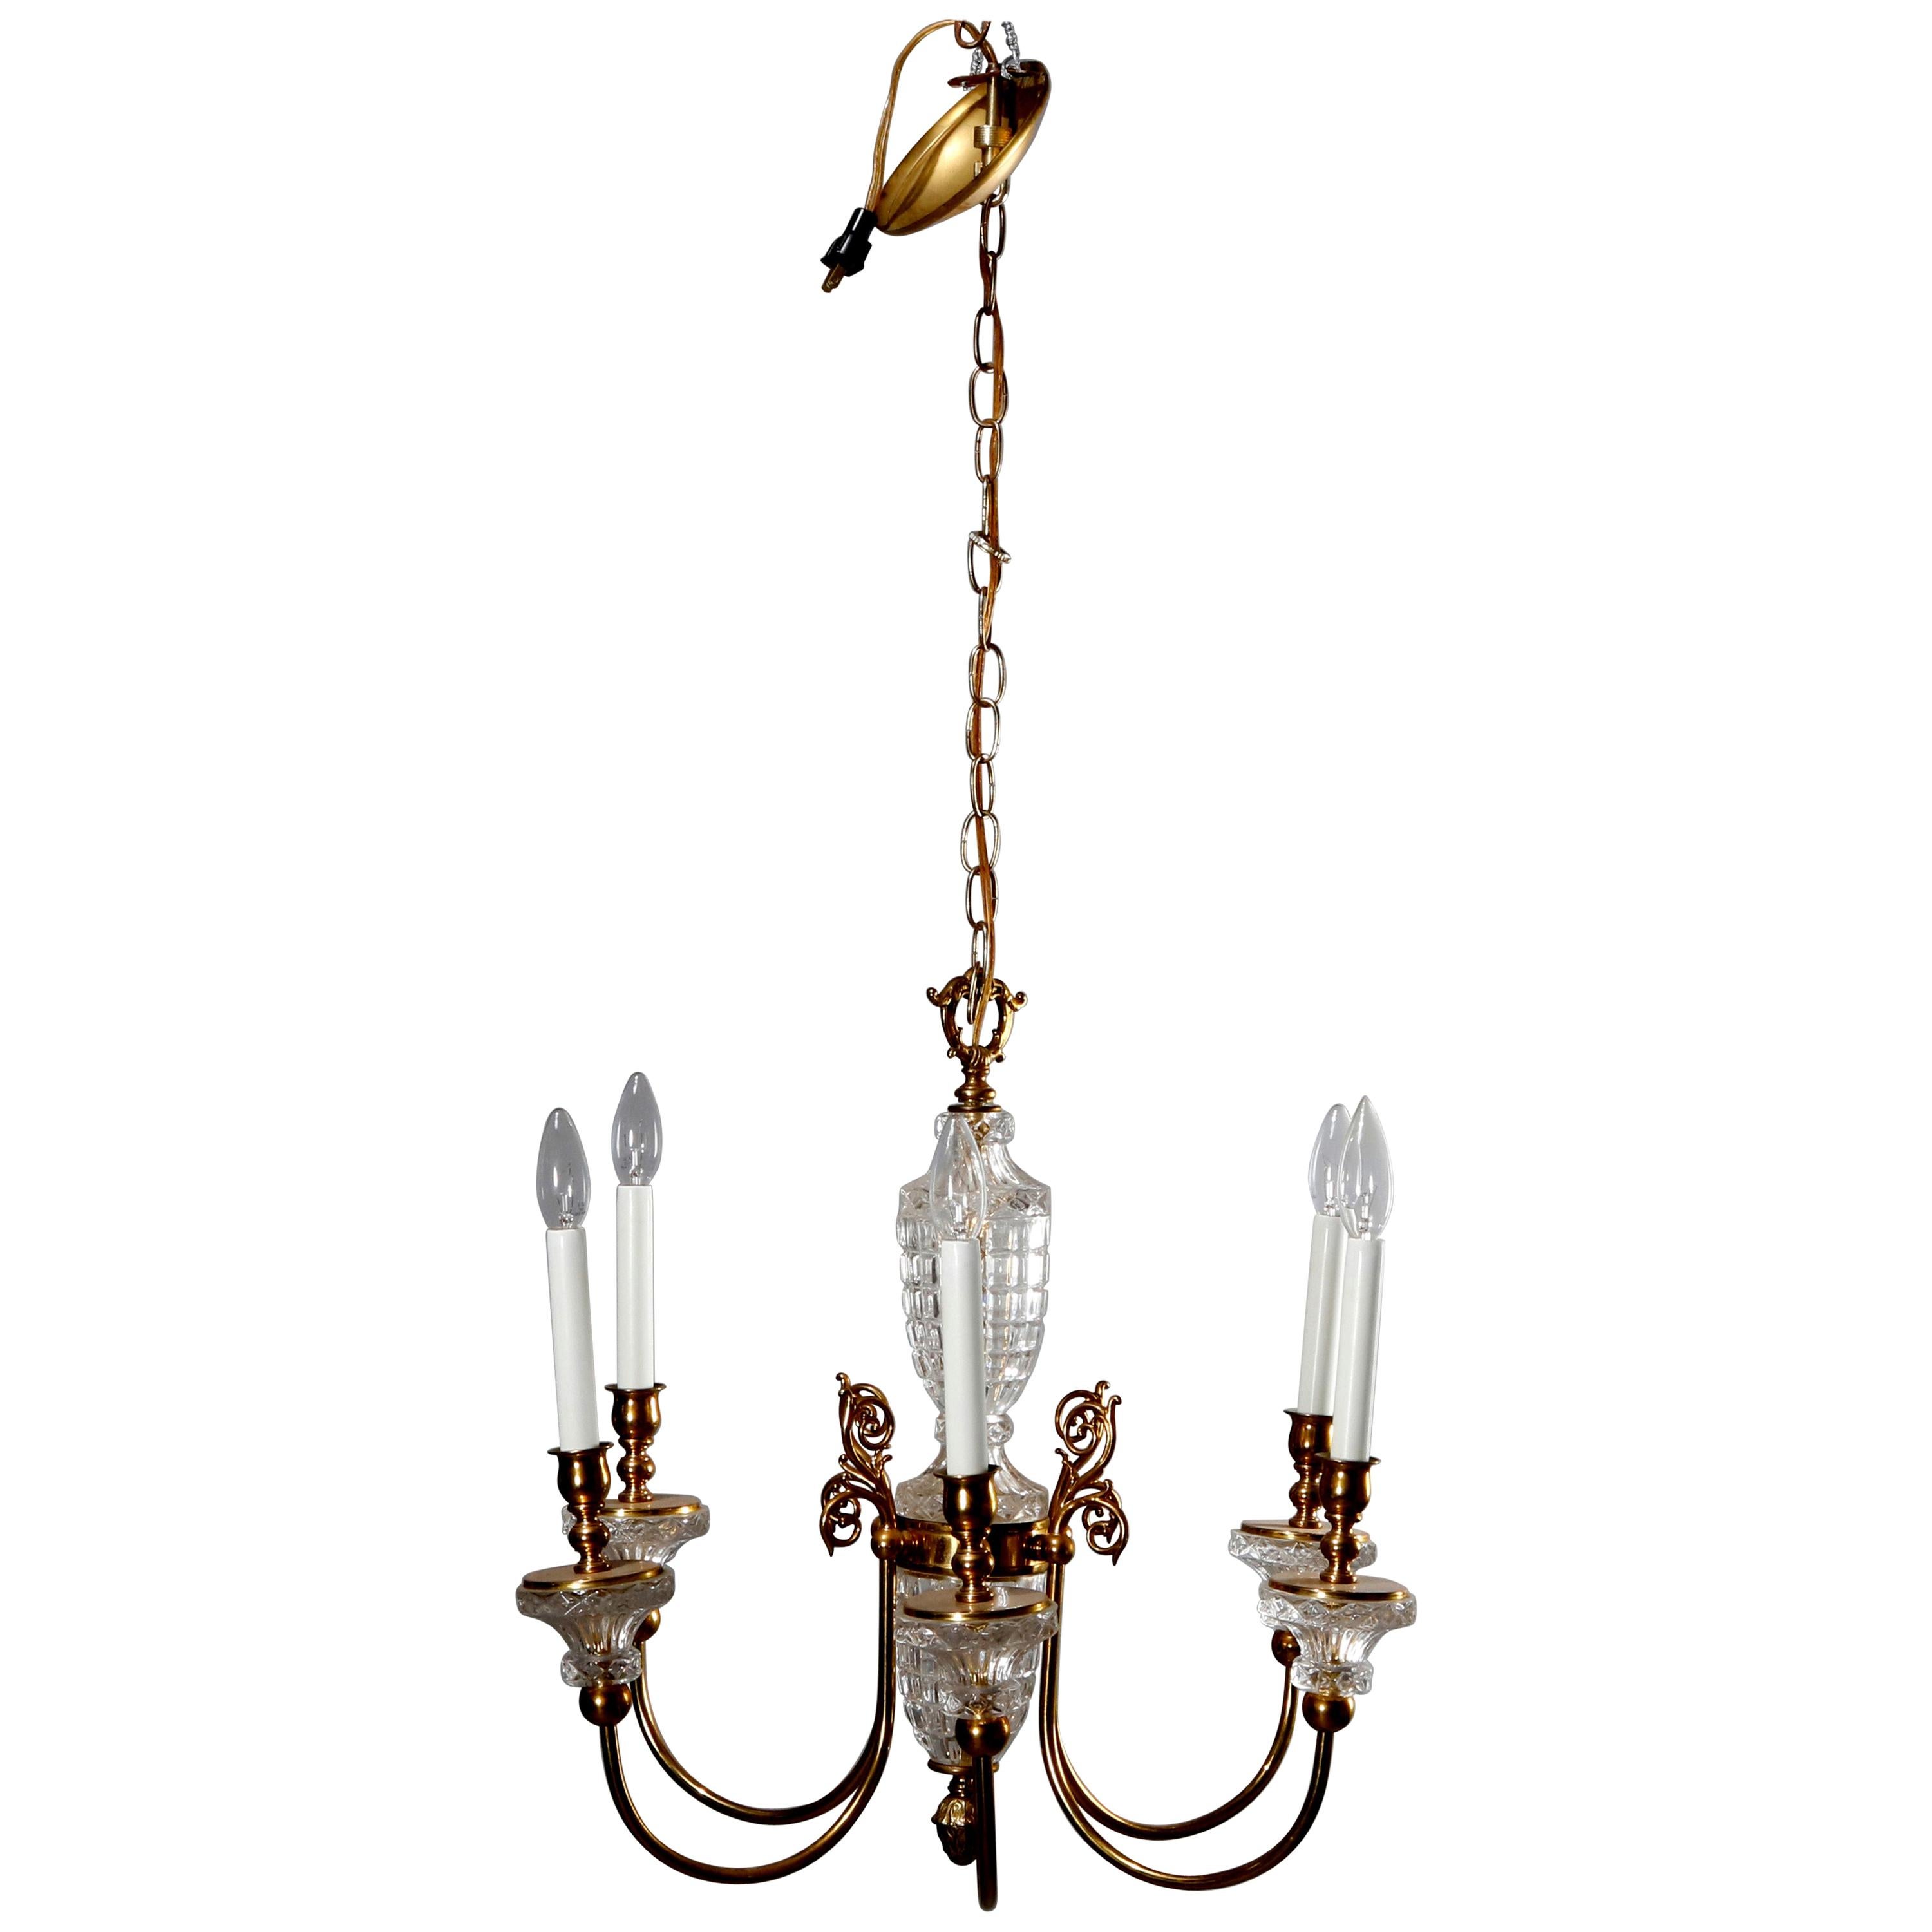 Antique French Bronze & Crystal 6-Light Chandelier, circa 1930